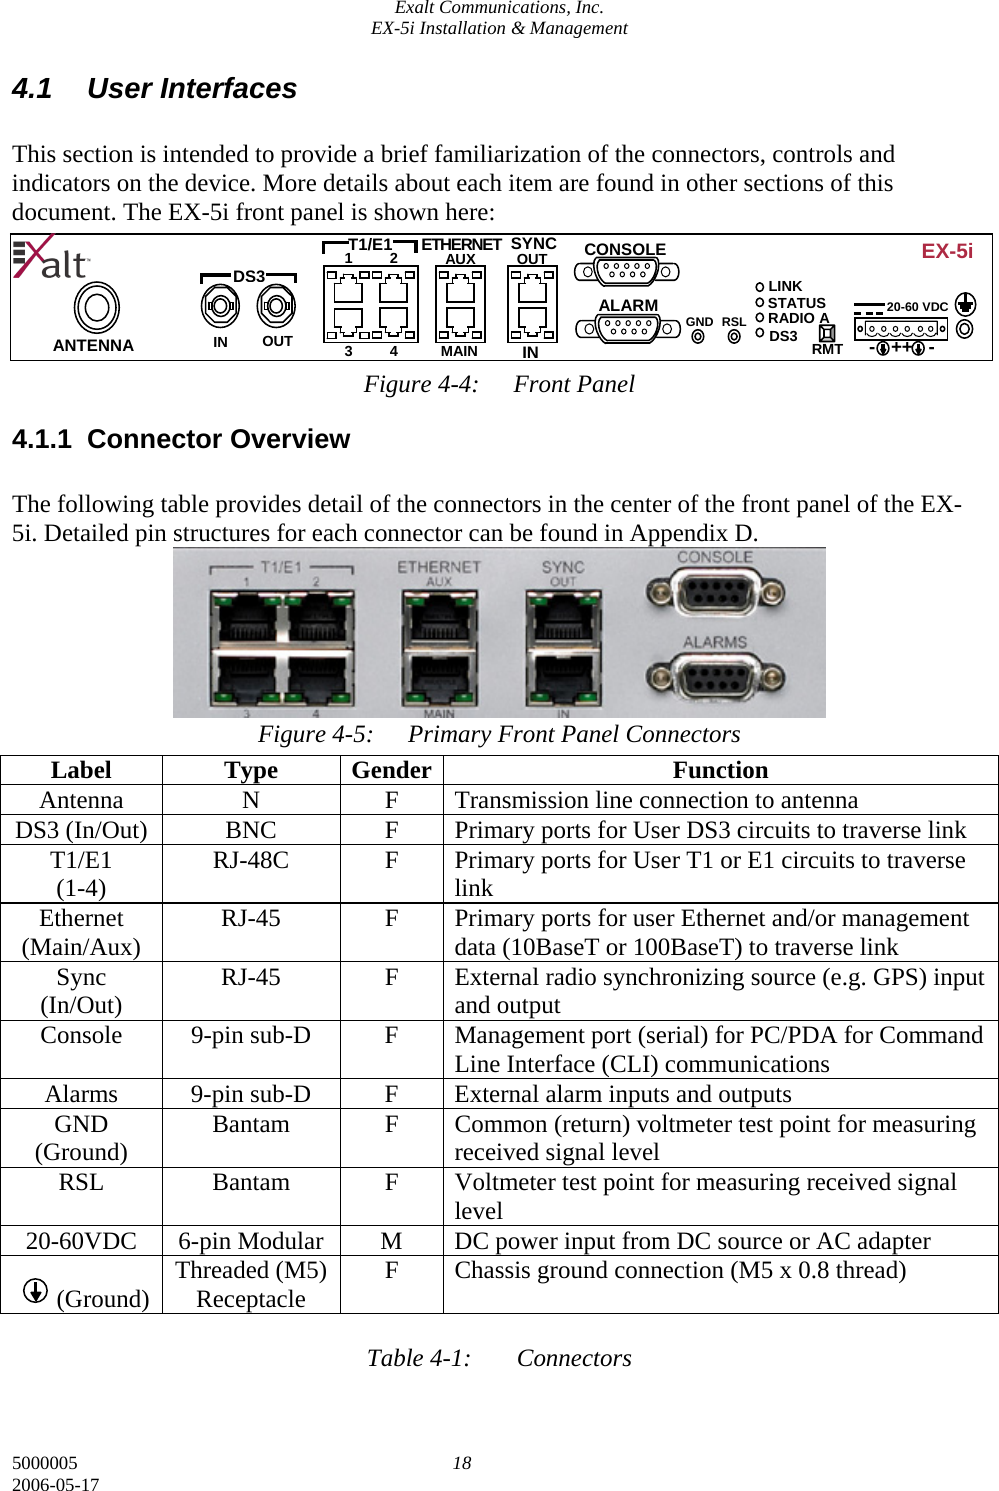 Exalt Communications, Inc. EX-5i Installation &amp; Management 5000005  18 2006-05-17 4.1 User Interfaces  This section is intended to provide a brief familiarization of the connectors, controls and indicators on the device. More details about each item are found in other sections of this document. The EX-5i front panel is shown here:      Figure 4-4:  Front Panel 4.1.1 Connector Overview  The following table provides detail of the connectors in the center of the front panel of the EX-5i. Detailed pin structures for each connector can be found in Appendix D.       Figure 4-5:  Primary Front Panel Connectors  Table 4-1:  Connectors  Label Type Gender Function Antenna  N  F  Transmission line connection to antenna DS3 (In/Out)  BNC  F  Primary ports for User DS3 circuits to traverse link T1/E1 (1-4)  RJ-48C  F  Primary ports for User T1 or E1 circuits to traverse link Ethernet (Main/Aux)  RJ-45  F  Primary ports for user Ethernet and/or management data (10BaseT or 100BaseT) to traverse link Sync (In/Out)  RJ-45  F  External radio synchronizing source (e.g. GPS) input and output Console  9-pin sub-D  F  Management port (serial) for PC/PDA for Command Line Interface (CLI) communications Alarms 9-pin sub-D F External alarm inputs and outputs GND (Ground)  Bantam  F  Common (return) voltmeter test point for measuring received signal level RSL  Bantam  F  Voltmeter test point for measuring received signal level 20-60VDC  6-pin Modular  M  DC power input from DC source or AC adapter         (Ground)  Threaded (M5) Receptacle  F  Chassis ground connection (M5 x 0.8 thread)  ANTENNA DS3OUT IN RSL CONSOLE ETHERNET AUX T1/E1  SYNC MAIN  IN 1 2 3 OUT 4 ALARM GND LINK STATUS RADIO A DS3  RMT  -   ++   -20-60 VDC EX-5i